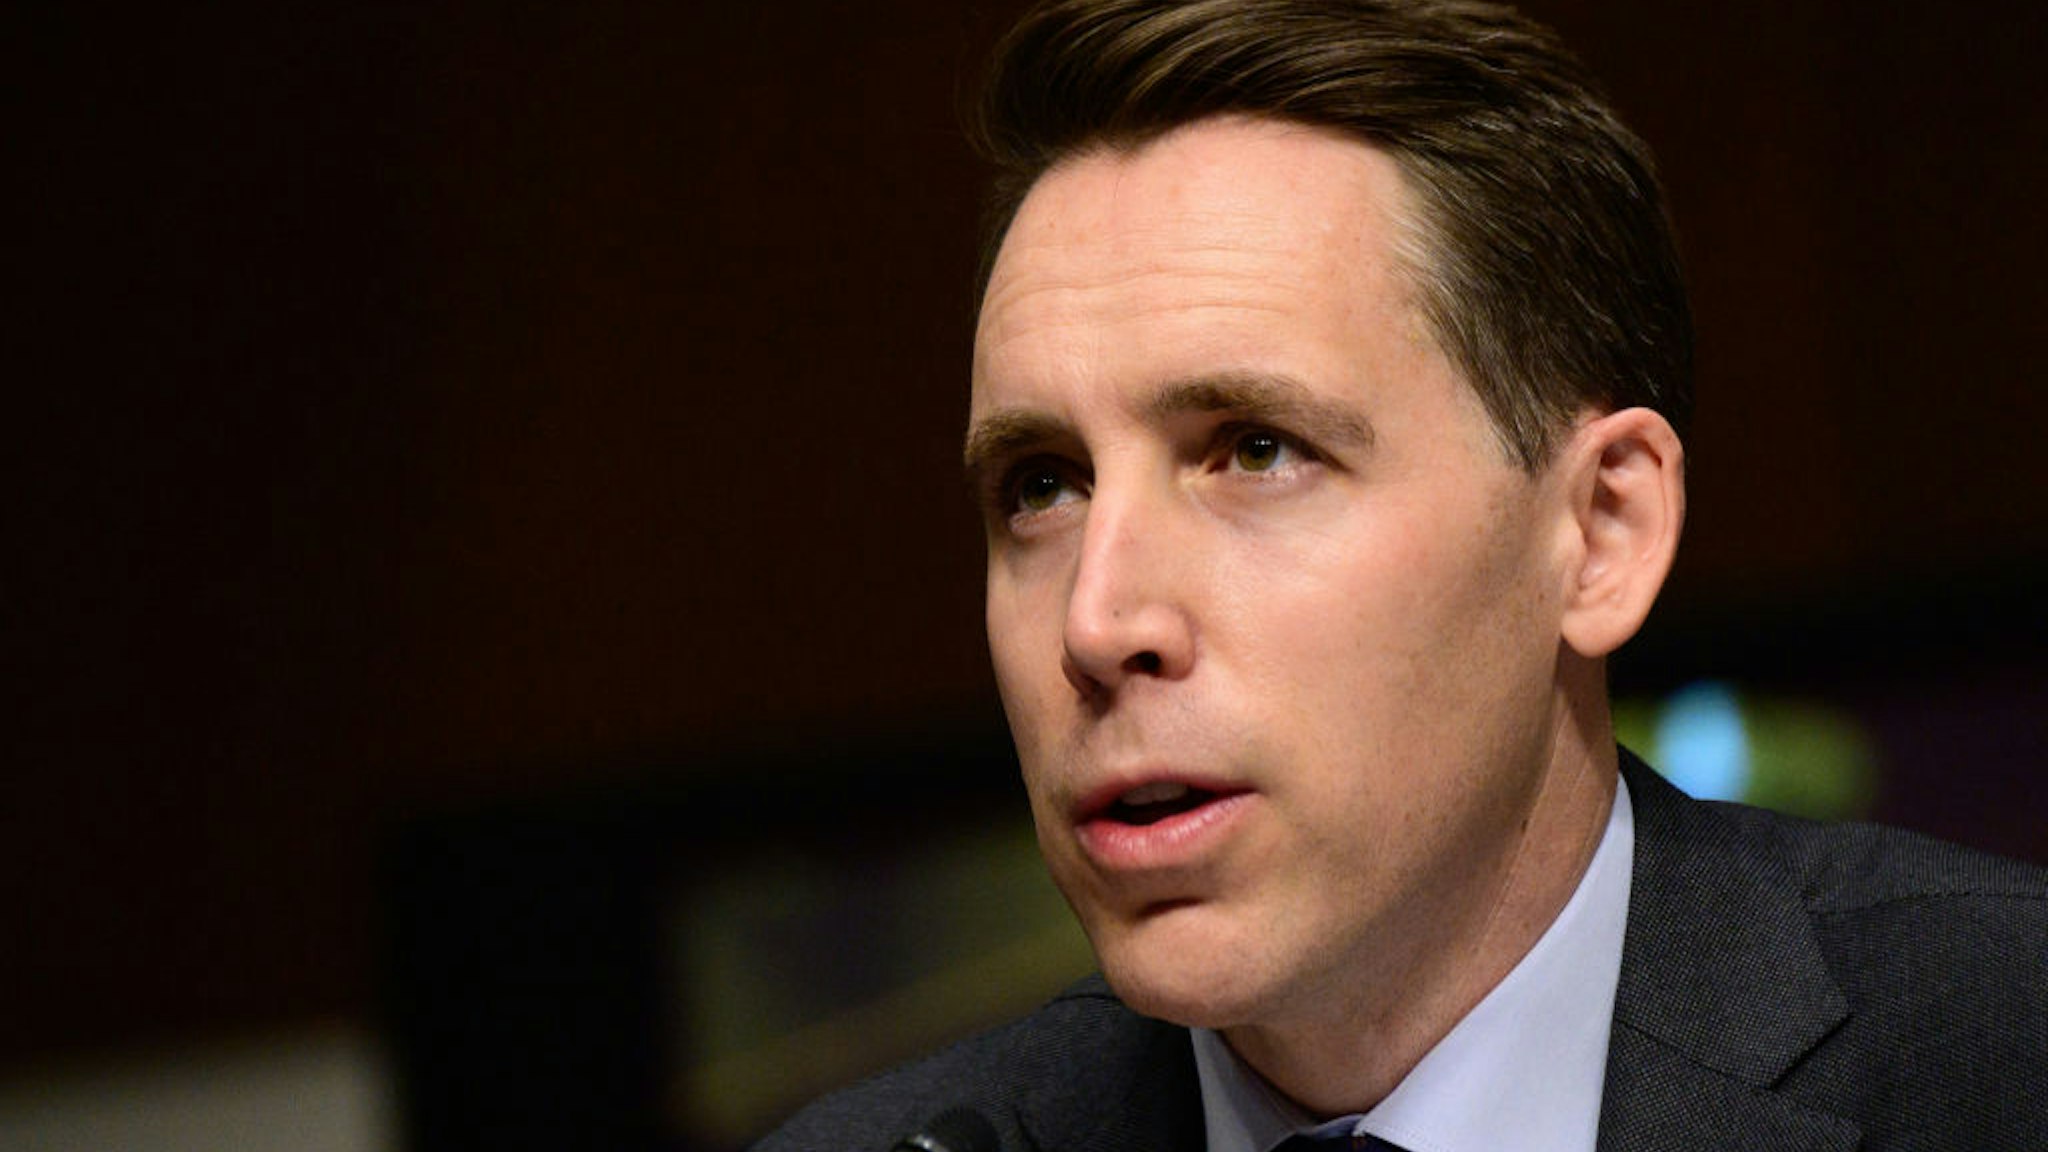 WASHINGTON, DC - FEBRUARY 23: U.S. Sen. Josh Hawley (R-MO) speaks during a Senate Homeland Security and Governmental Affairs and Senate Rules and Administration joint hearing on February 23, 2021 in Washington, DC. The committees are hearing testimony about the law enforcement preparation for and response to the attack on the U.S. Capitol on January 6, 2021.